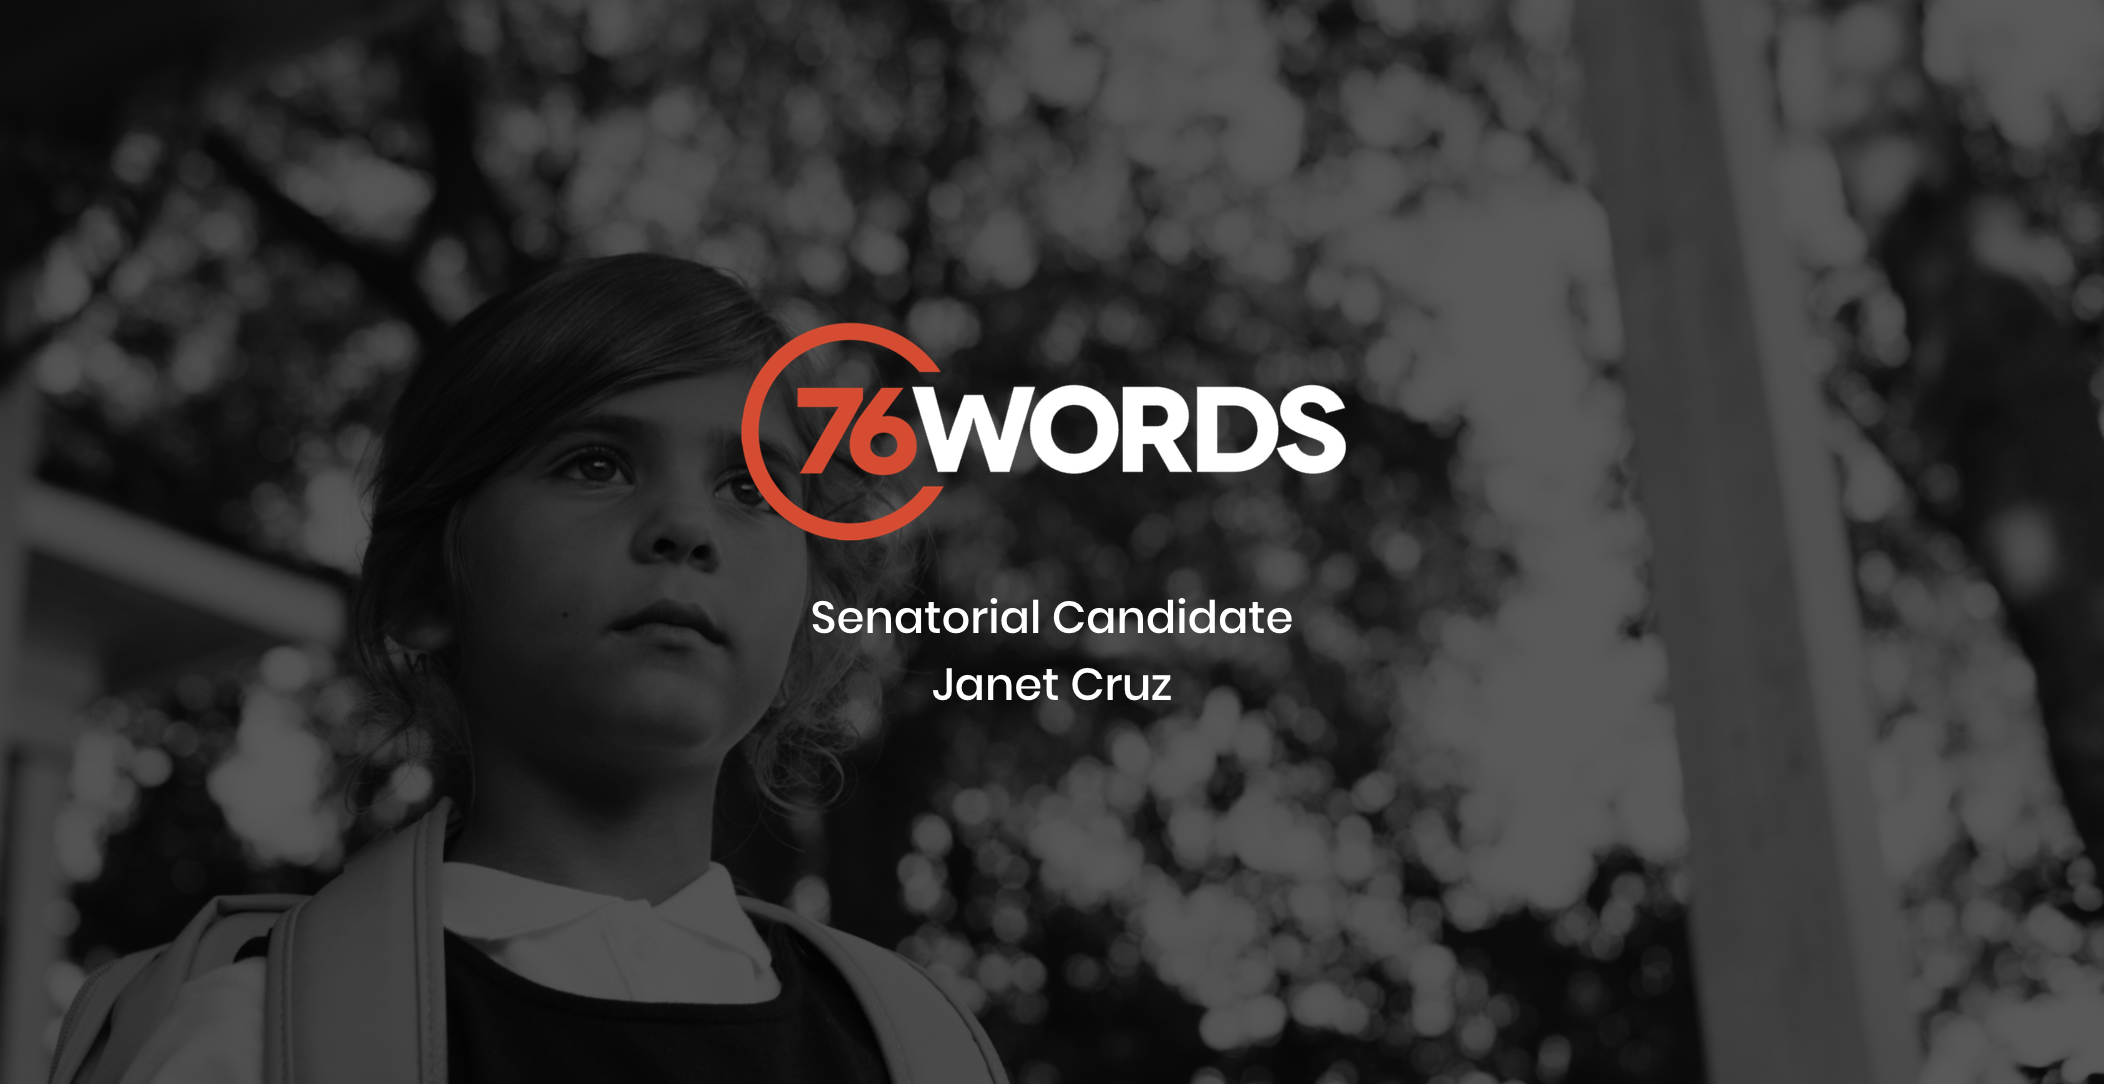 White and orange 76 Words Senatorial Candidate Janet Cruz logo with dimmed background showing a young girl wearing a backpack